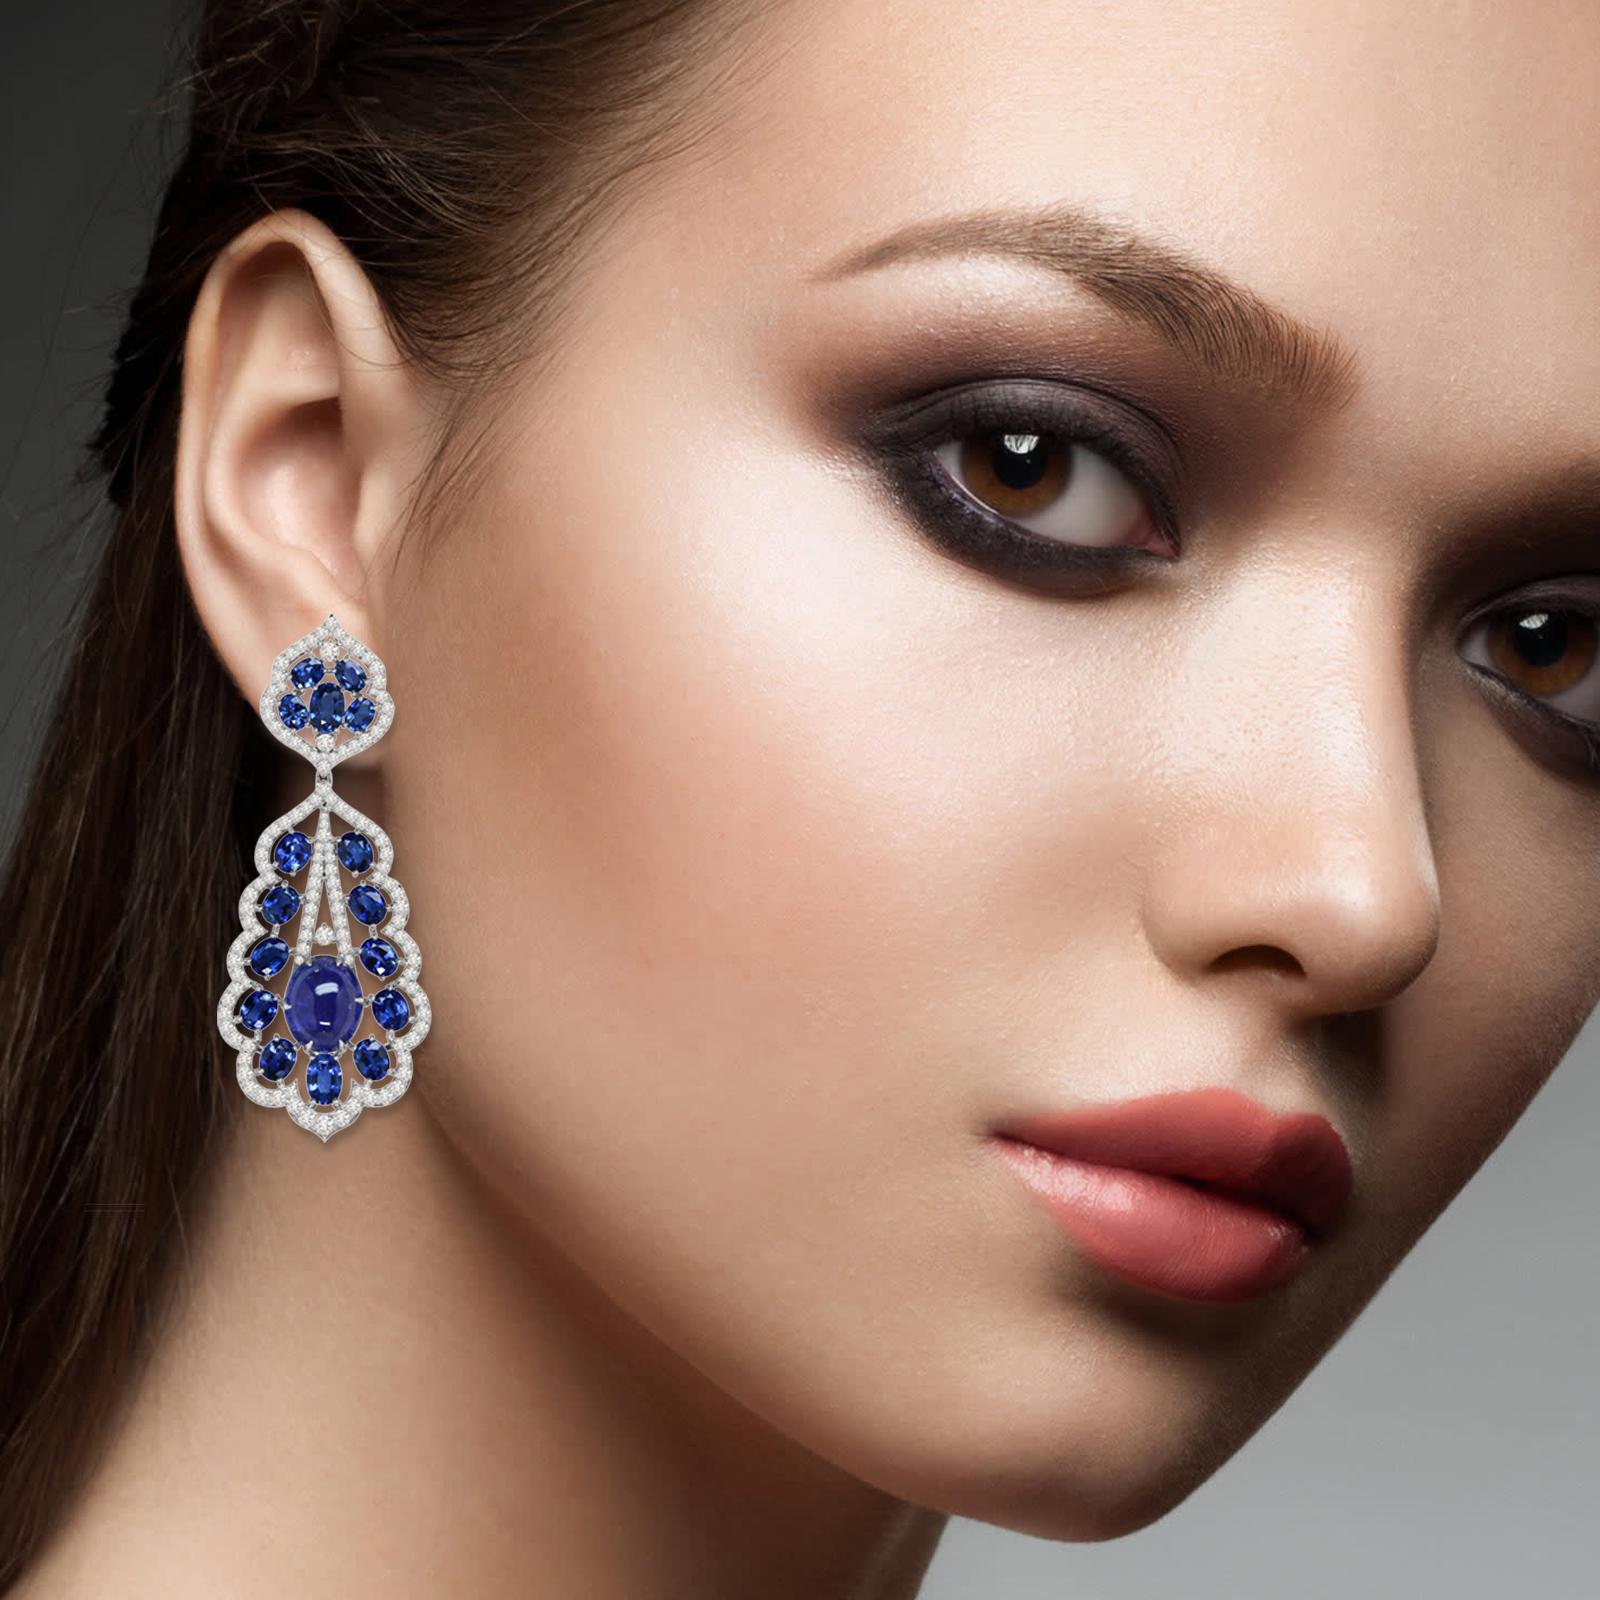 These beautiful drop earring are handcrafted in 14-karat gold. It is set with 24.36 carats tanzanite and 3.76 carats of sparkling diamonds.

FOLLOW  MEGHNA JEWELS storefront to view the latest collection & exclusive pieces.  Meghna Jewels is proudly